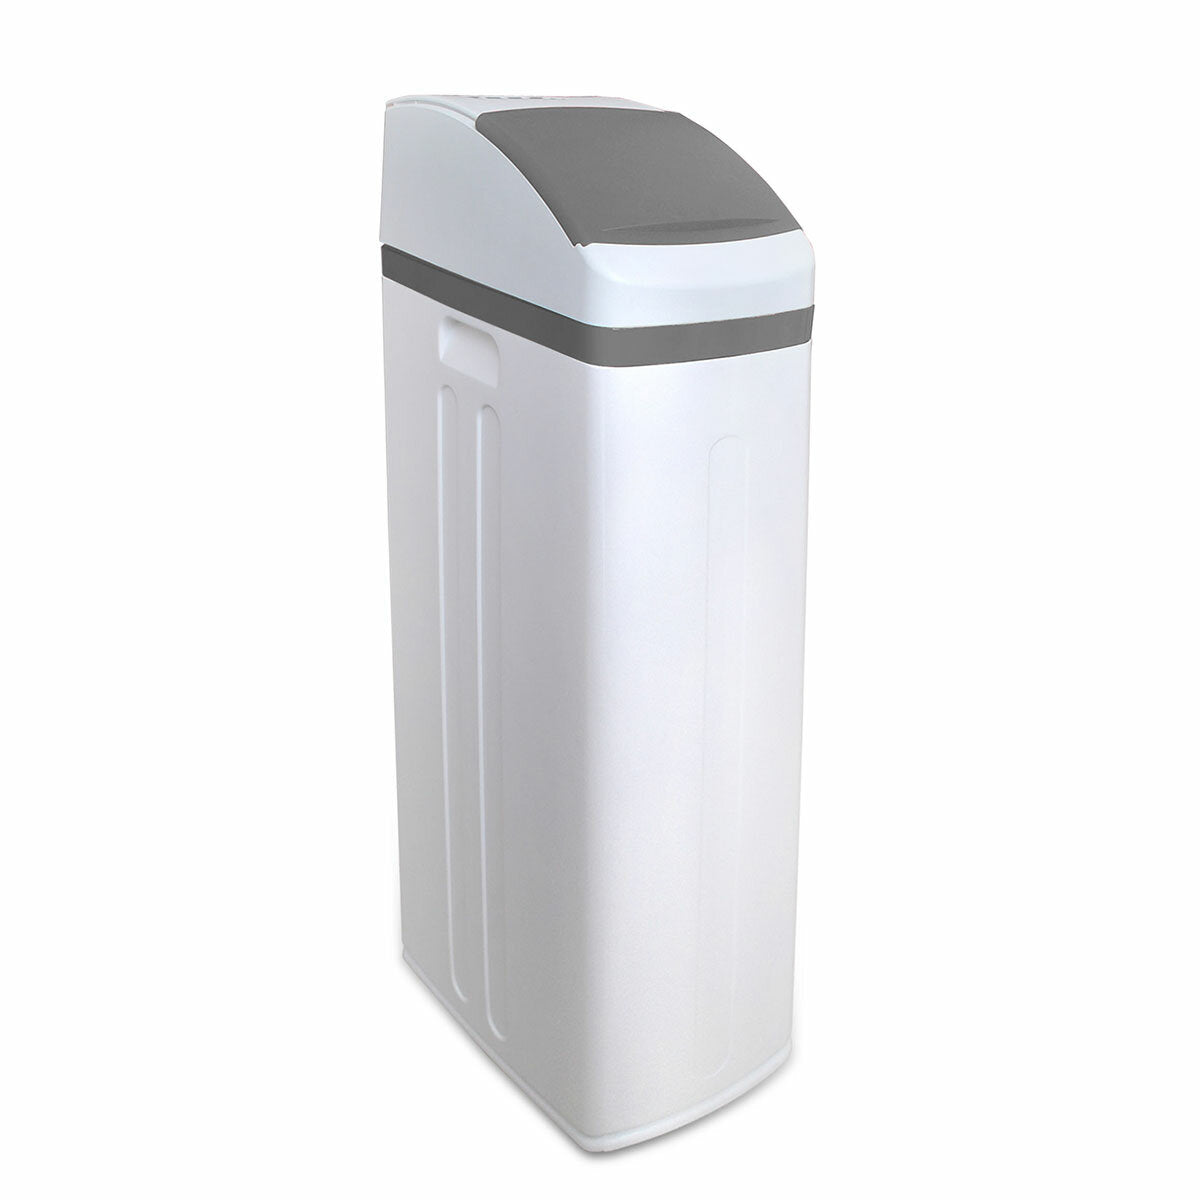 Gel Easy Soft 21 water softener with ion exchange